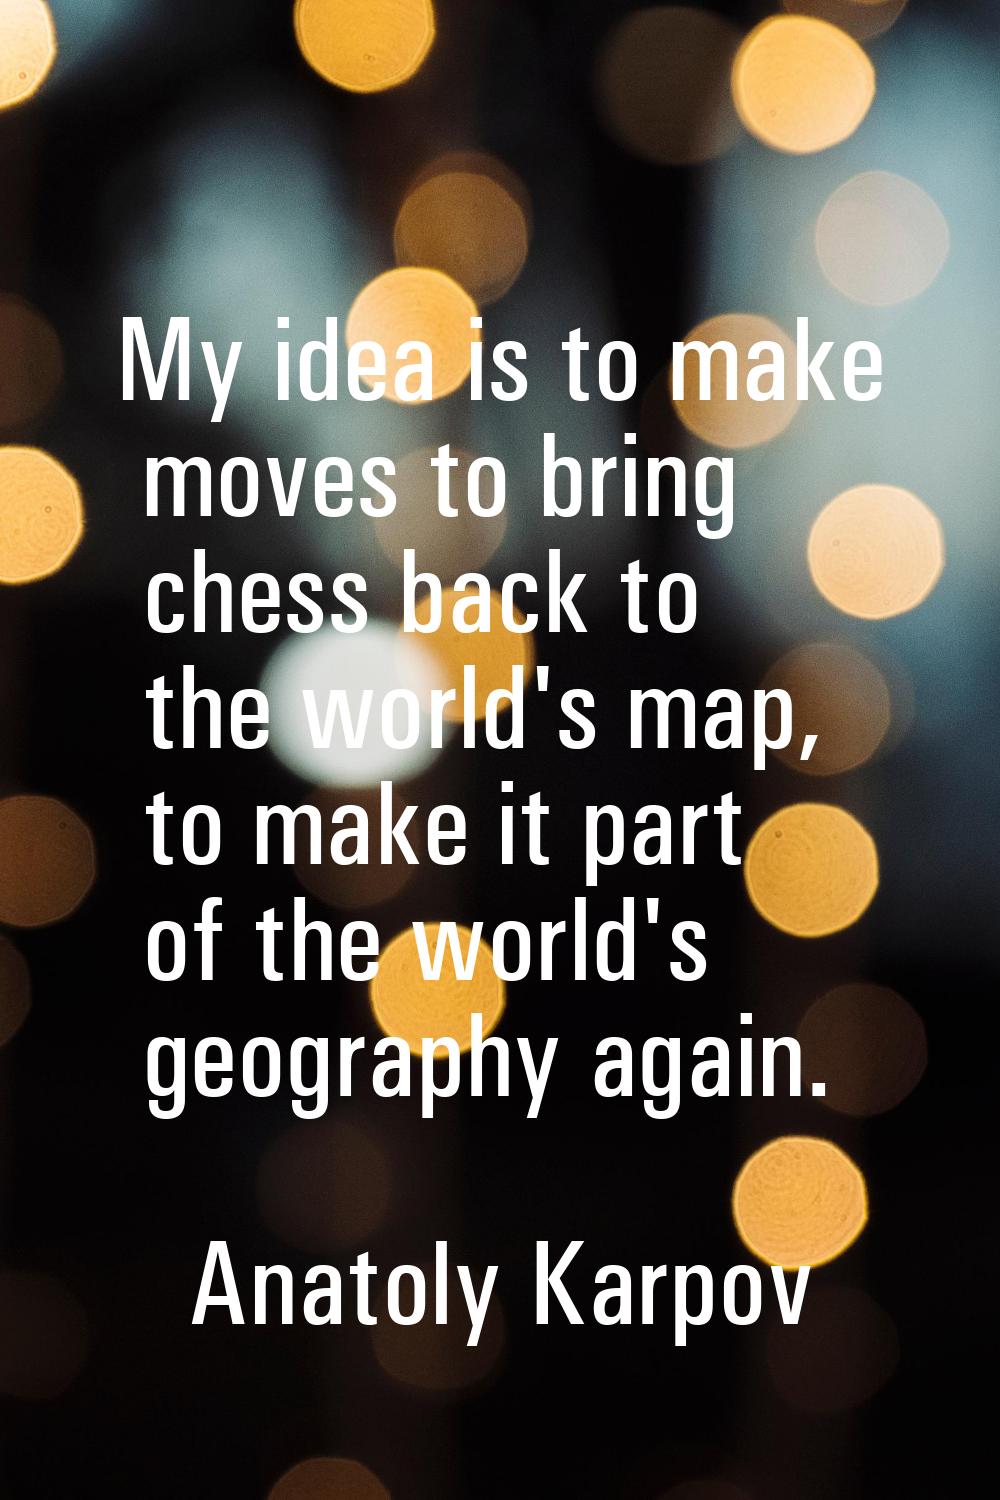 My idea is to make moves to bring chess back to the world's map, to make it part of the world's geo